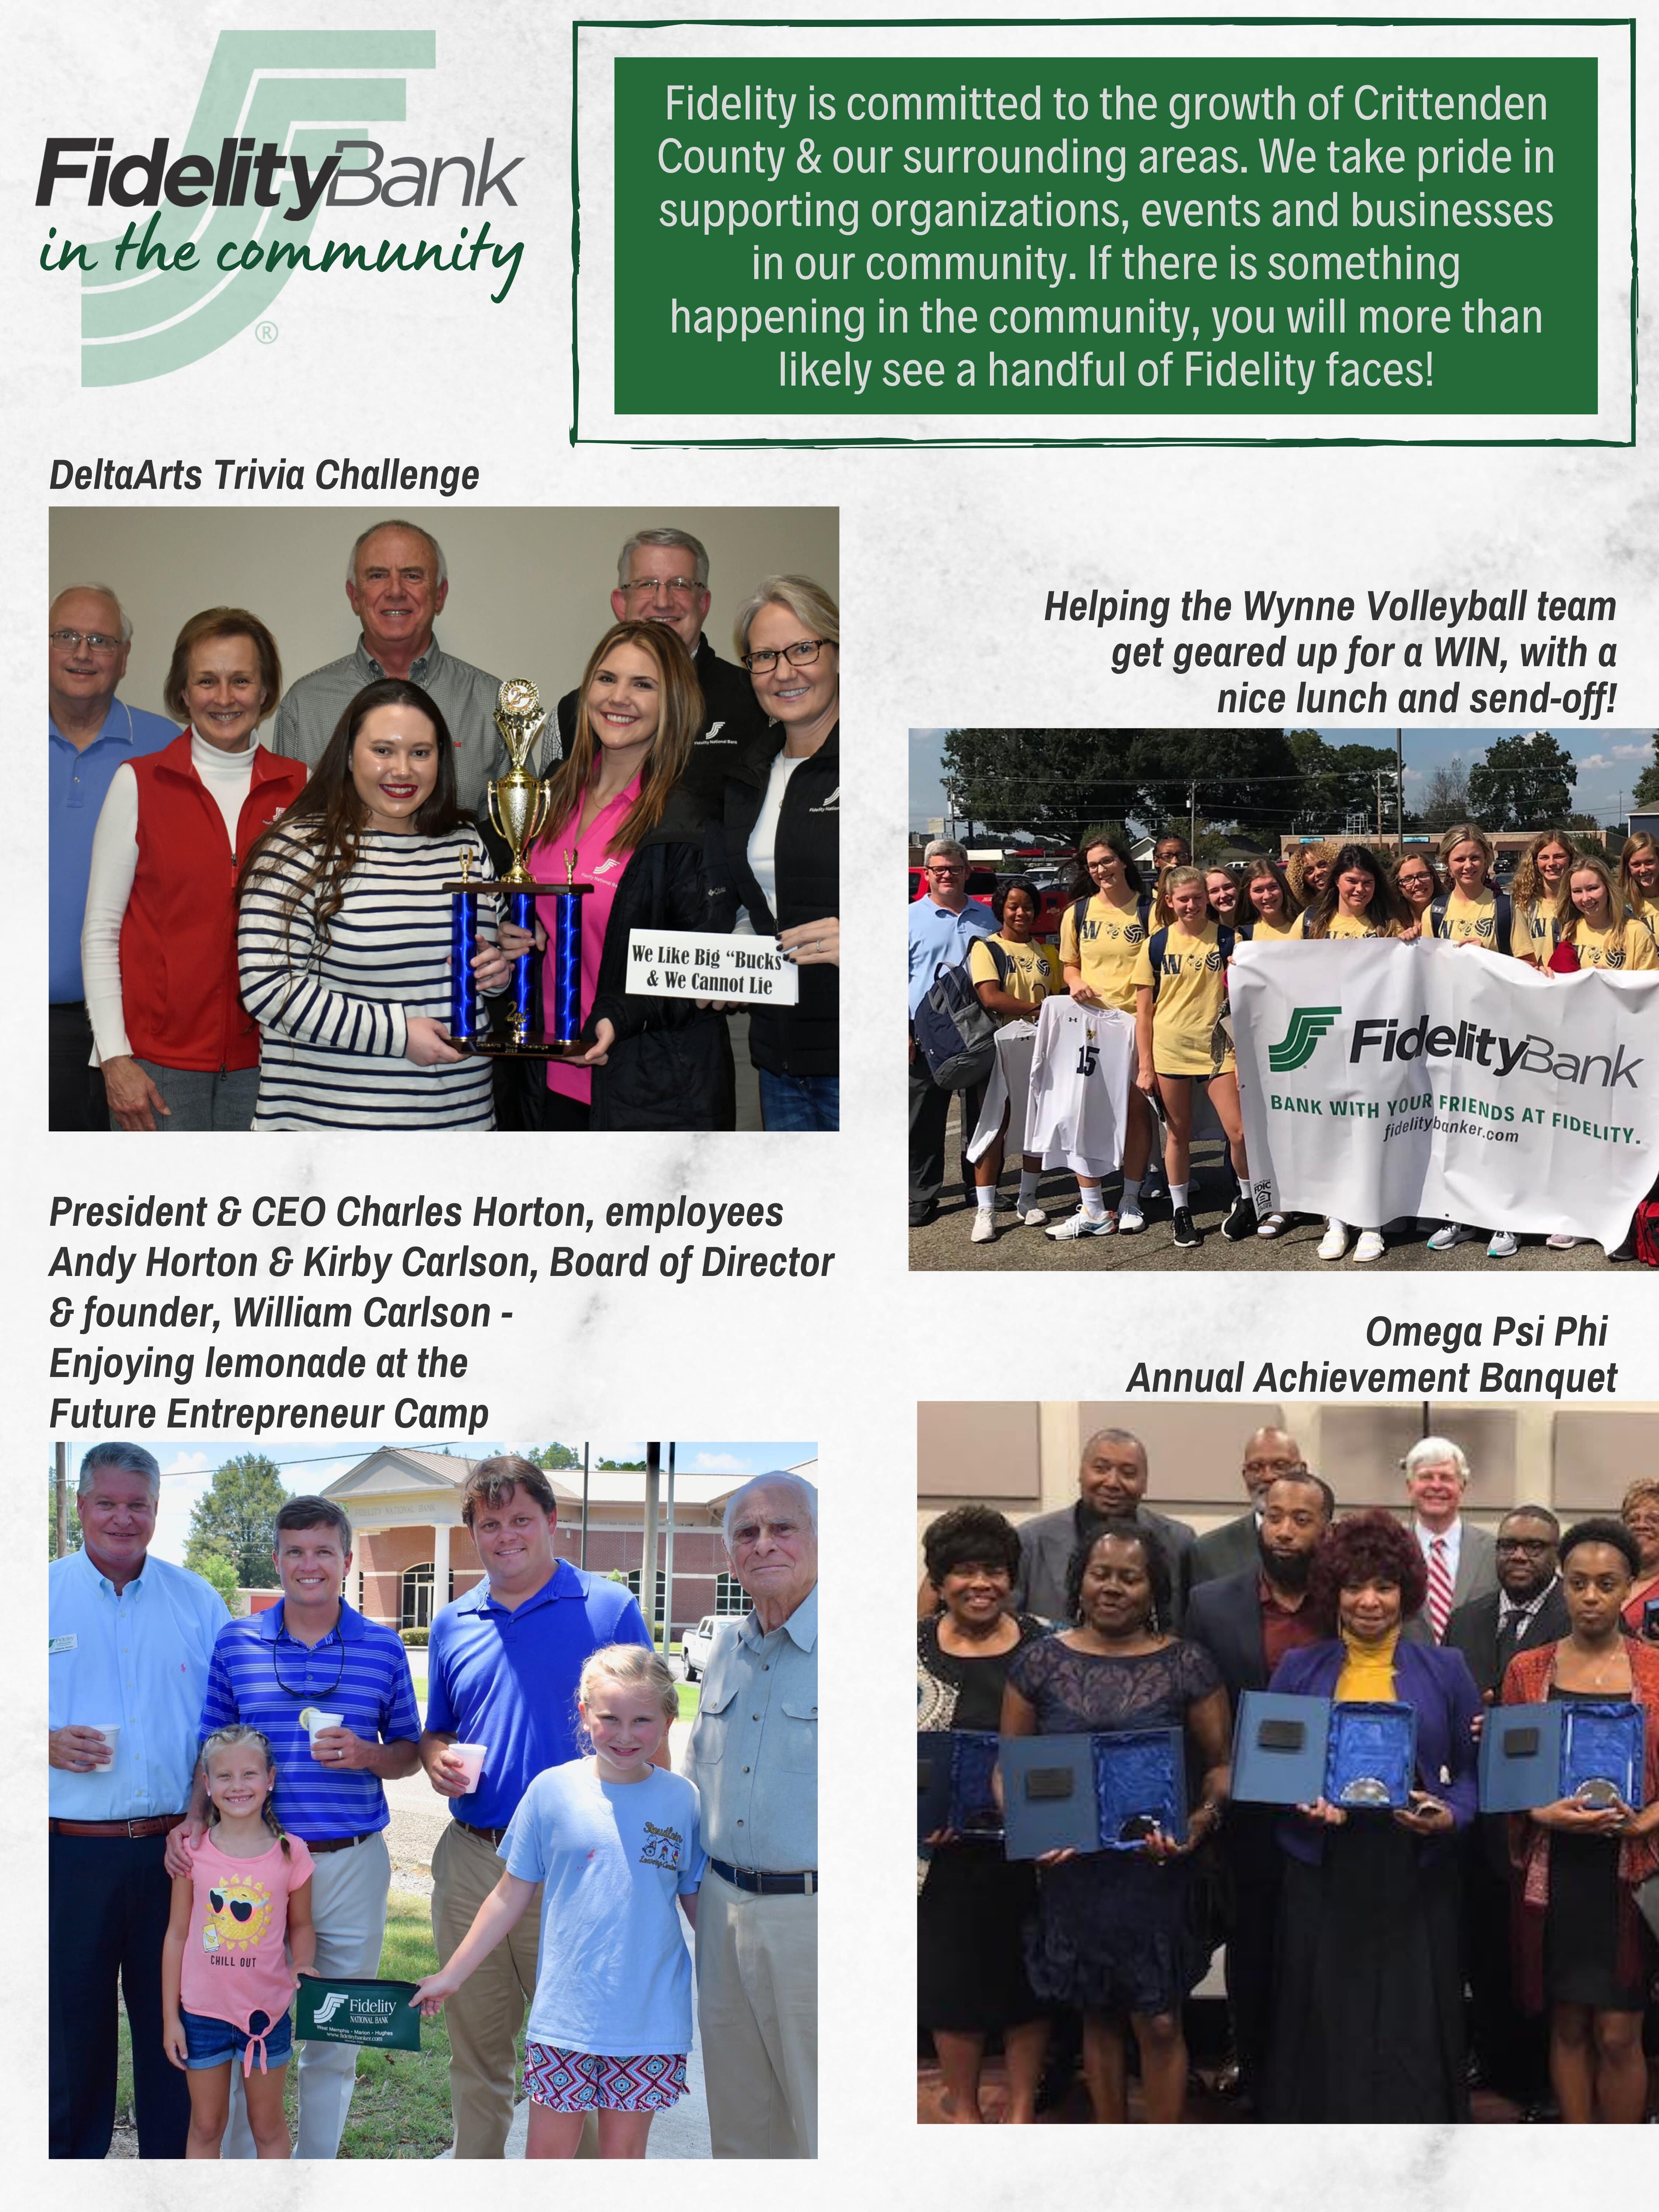 Fidelity in the community - Various events